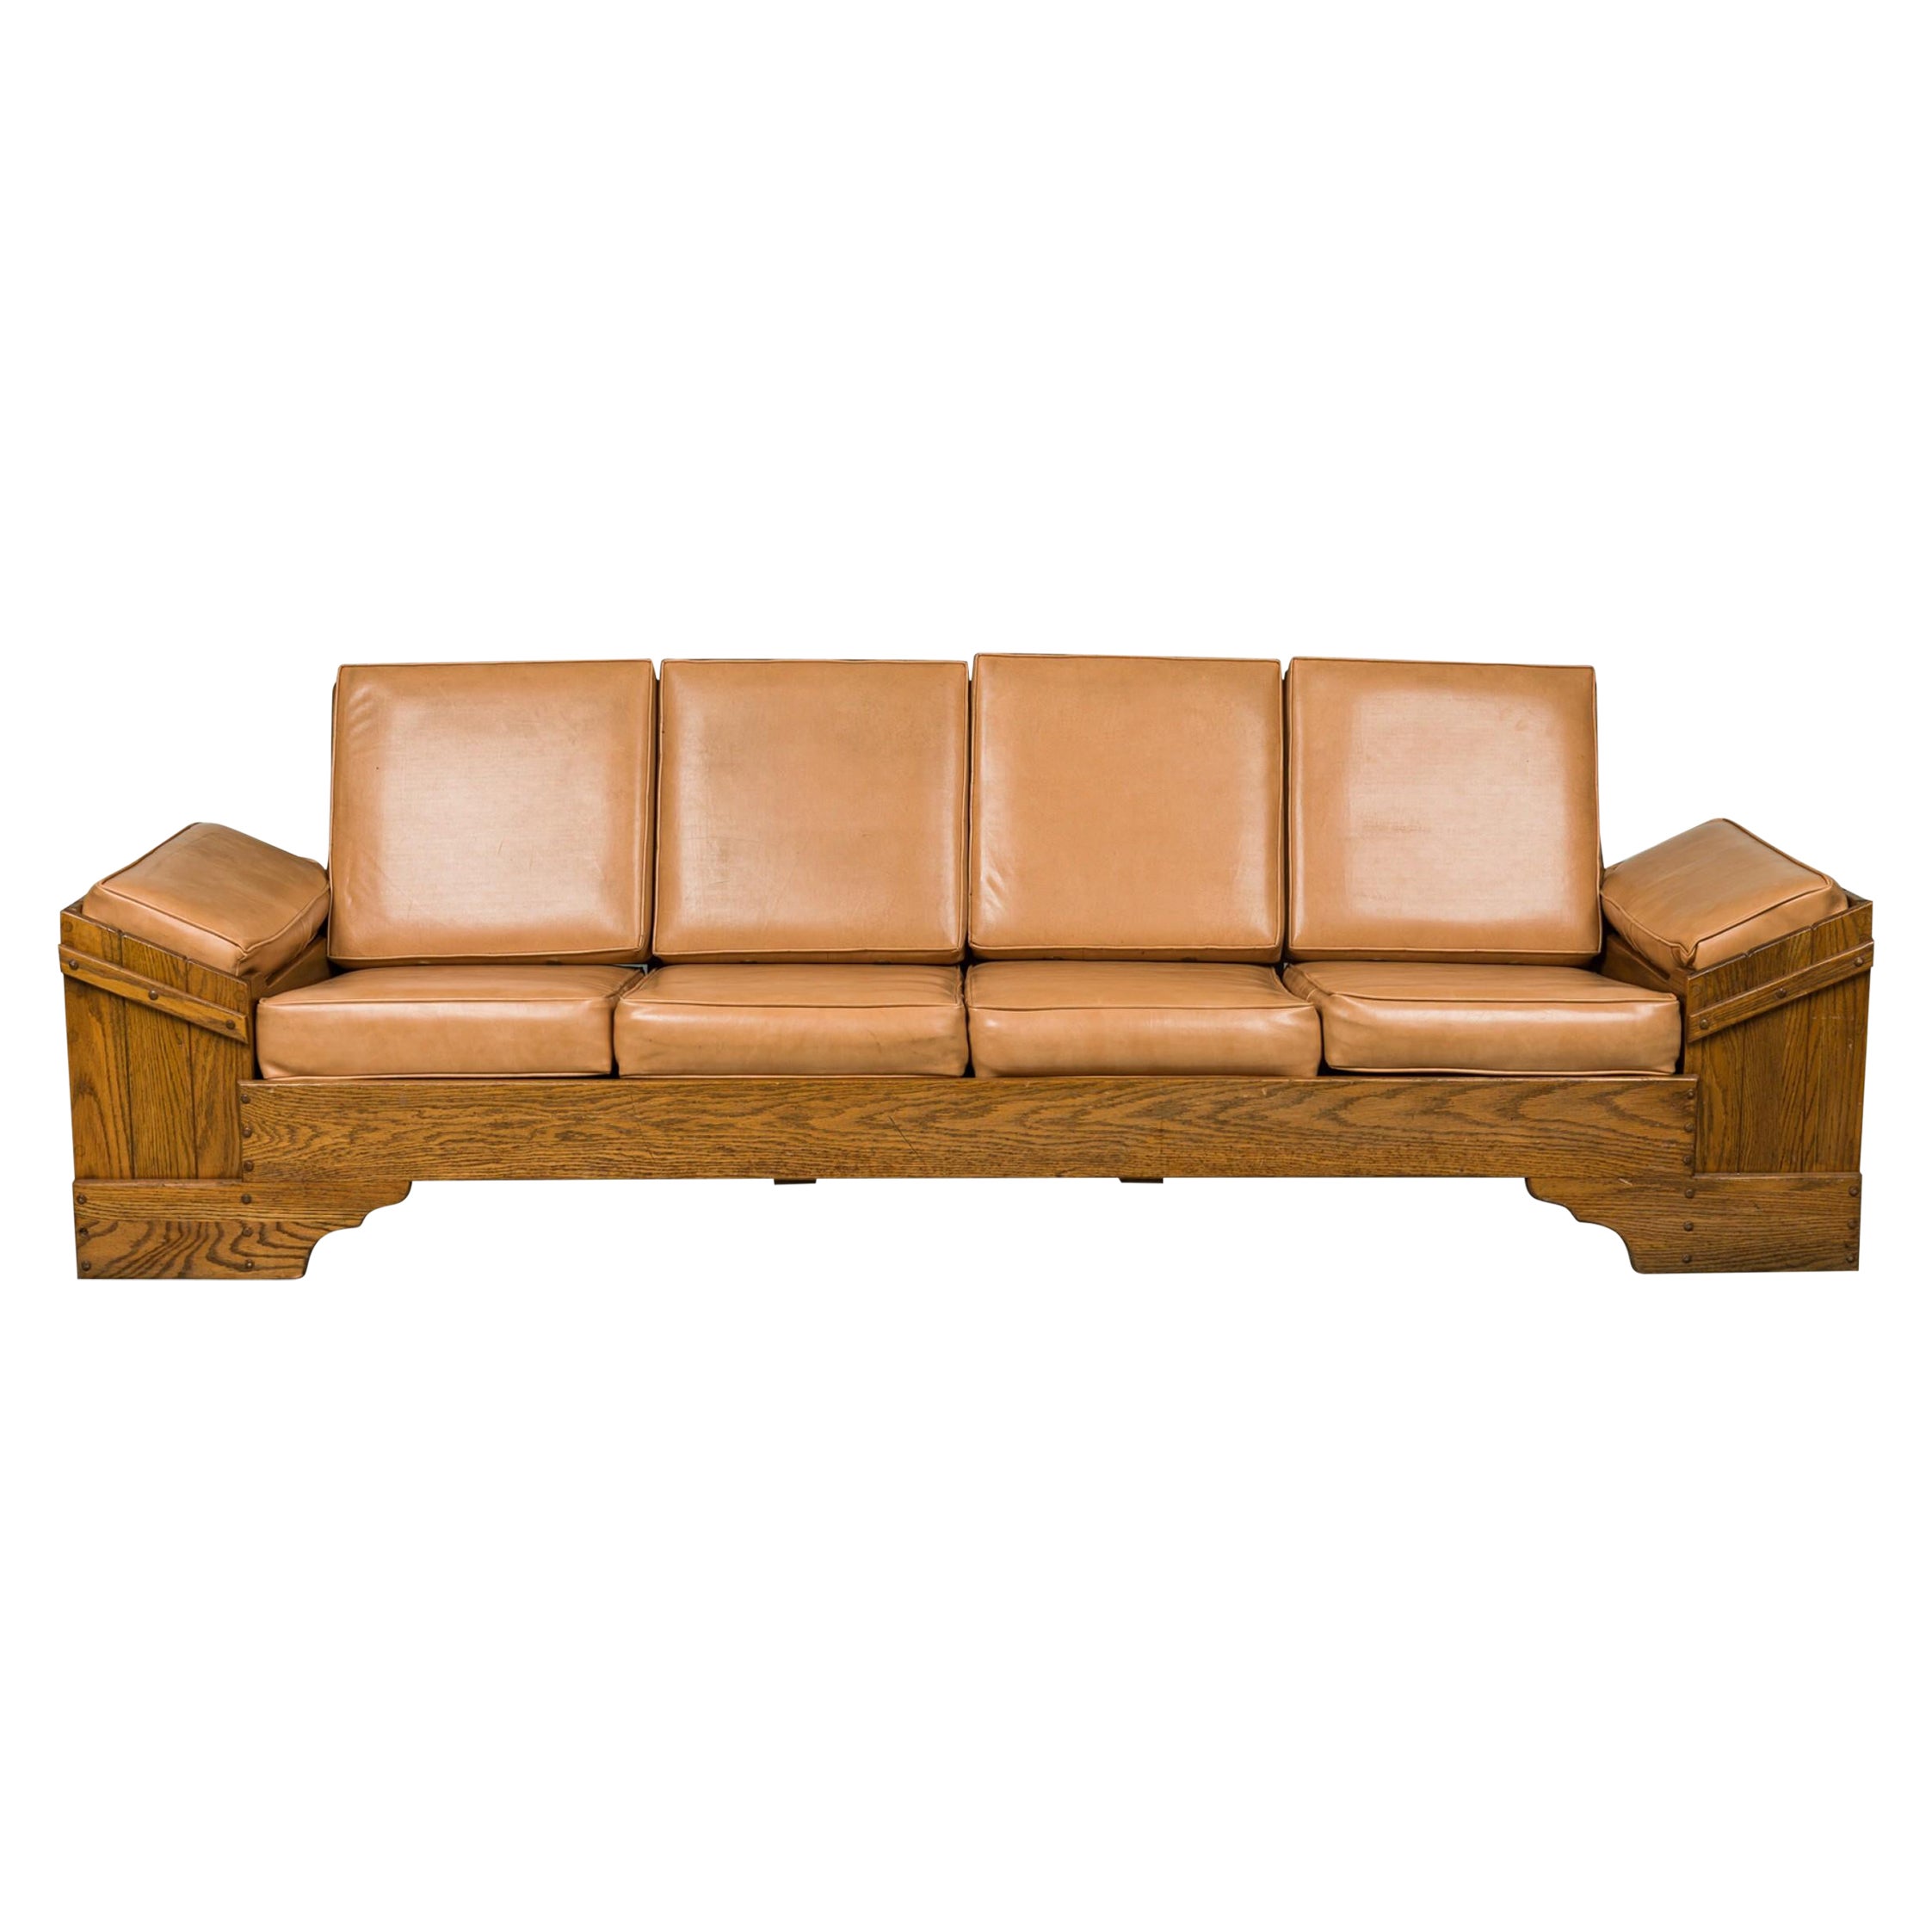 Rustic Old Hickory Wood and Tan Leather Settee